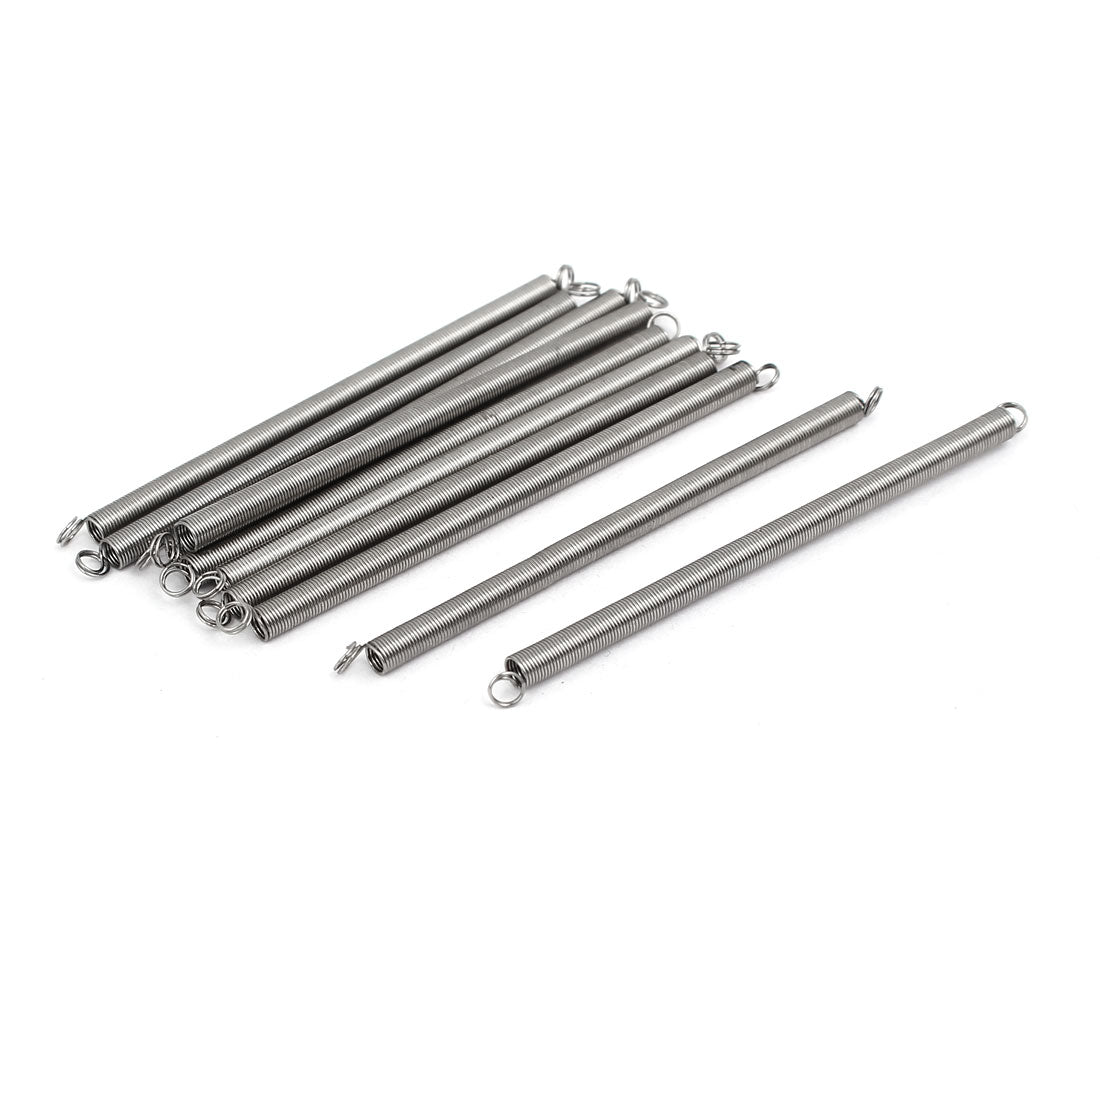 uxcell Uxcell 0.3mmx3mmx60mm 304 Stainless Steel Tension Springs Silver Tone 10pcs